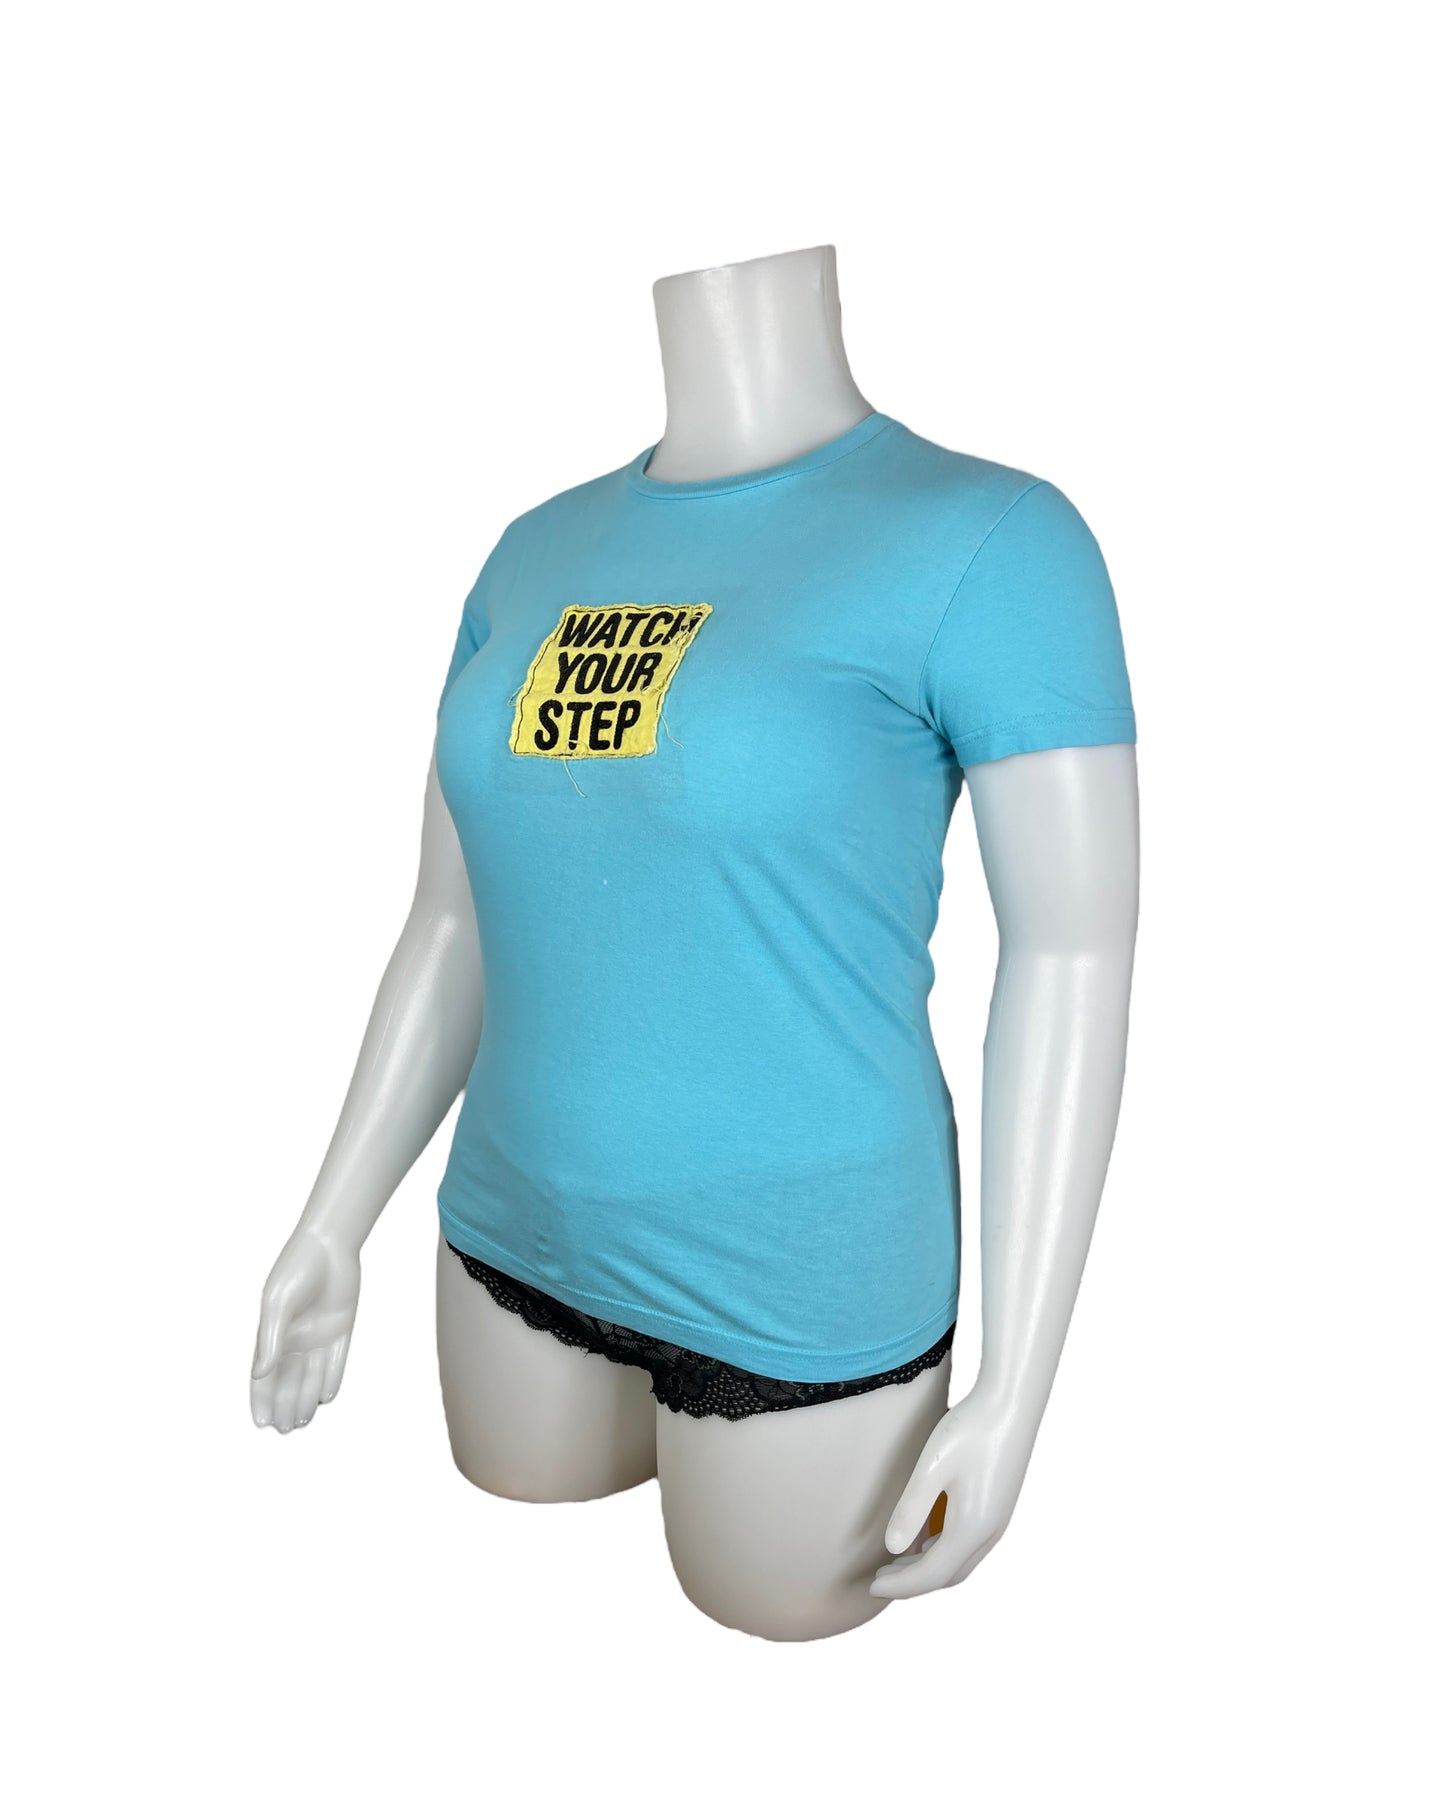 "American Apparel" Baby Blue 'Watch Your Step' Shirt (2XL)